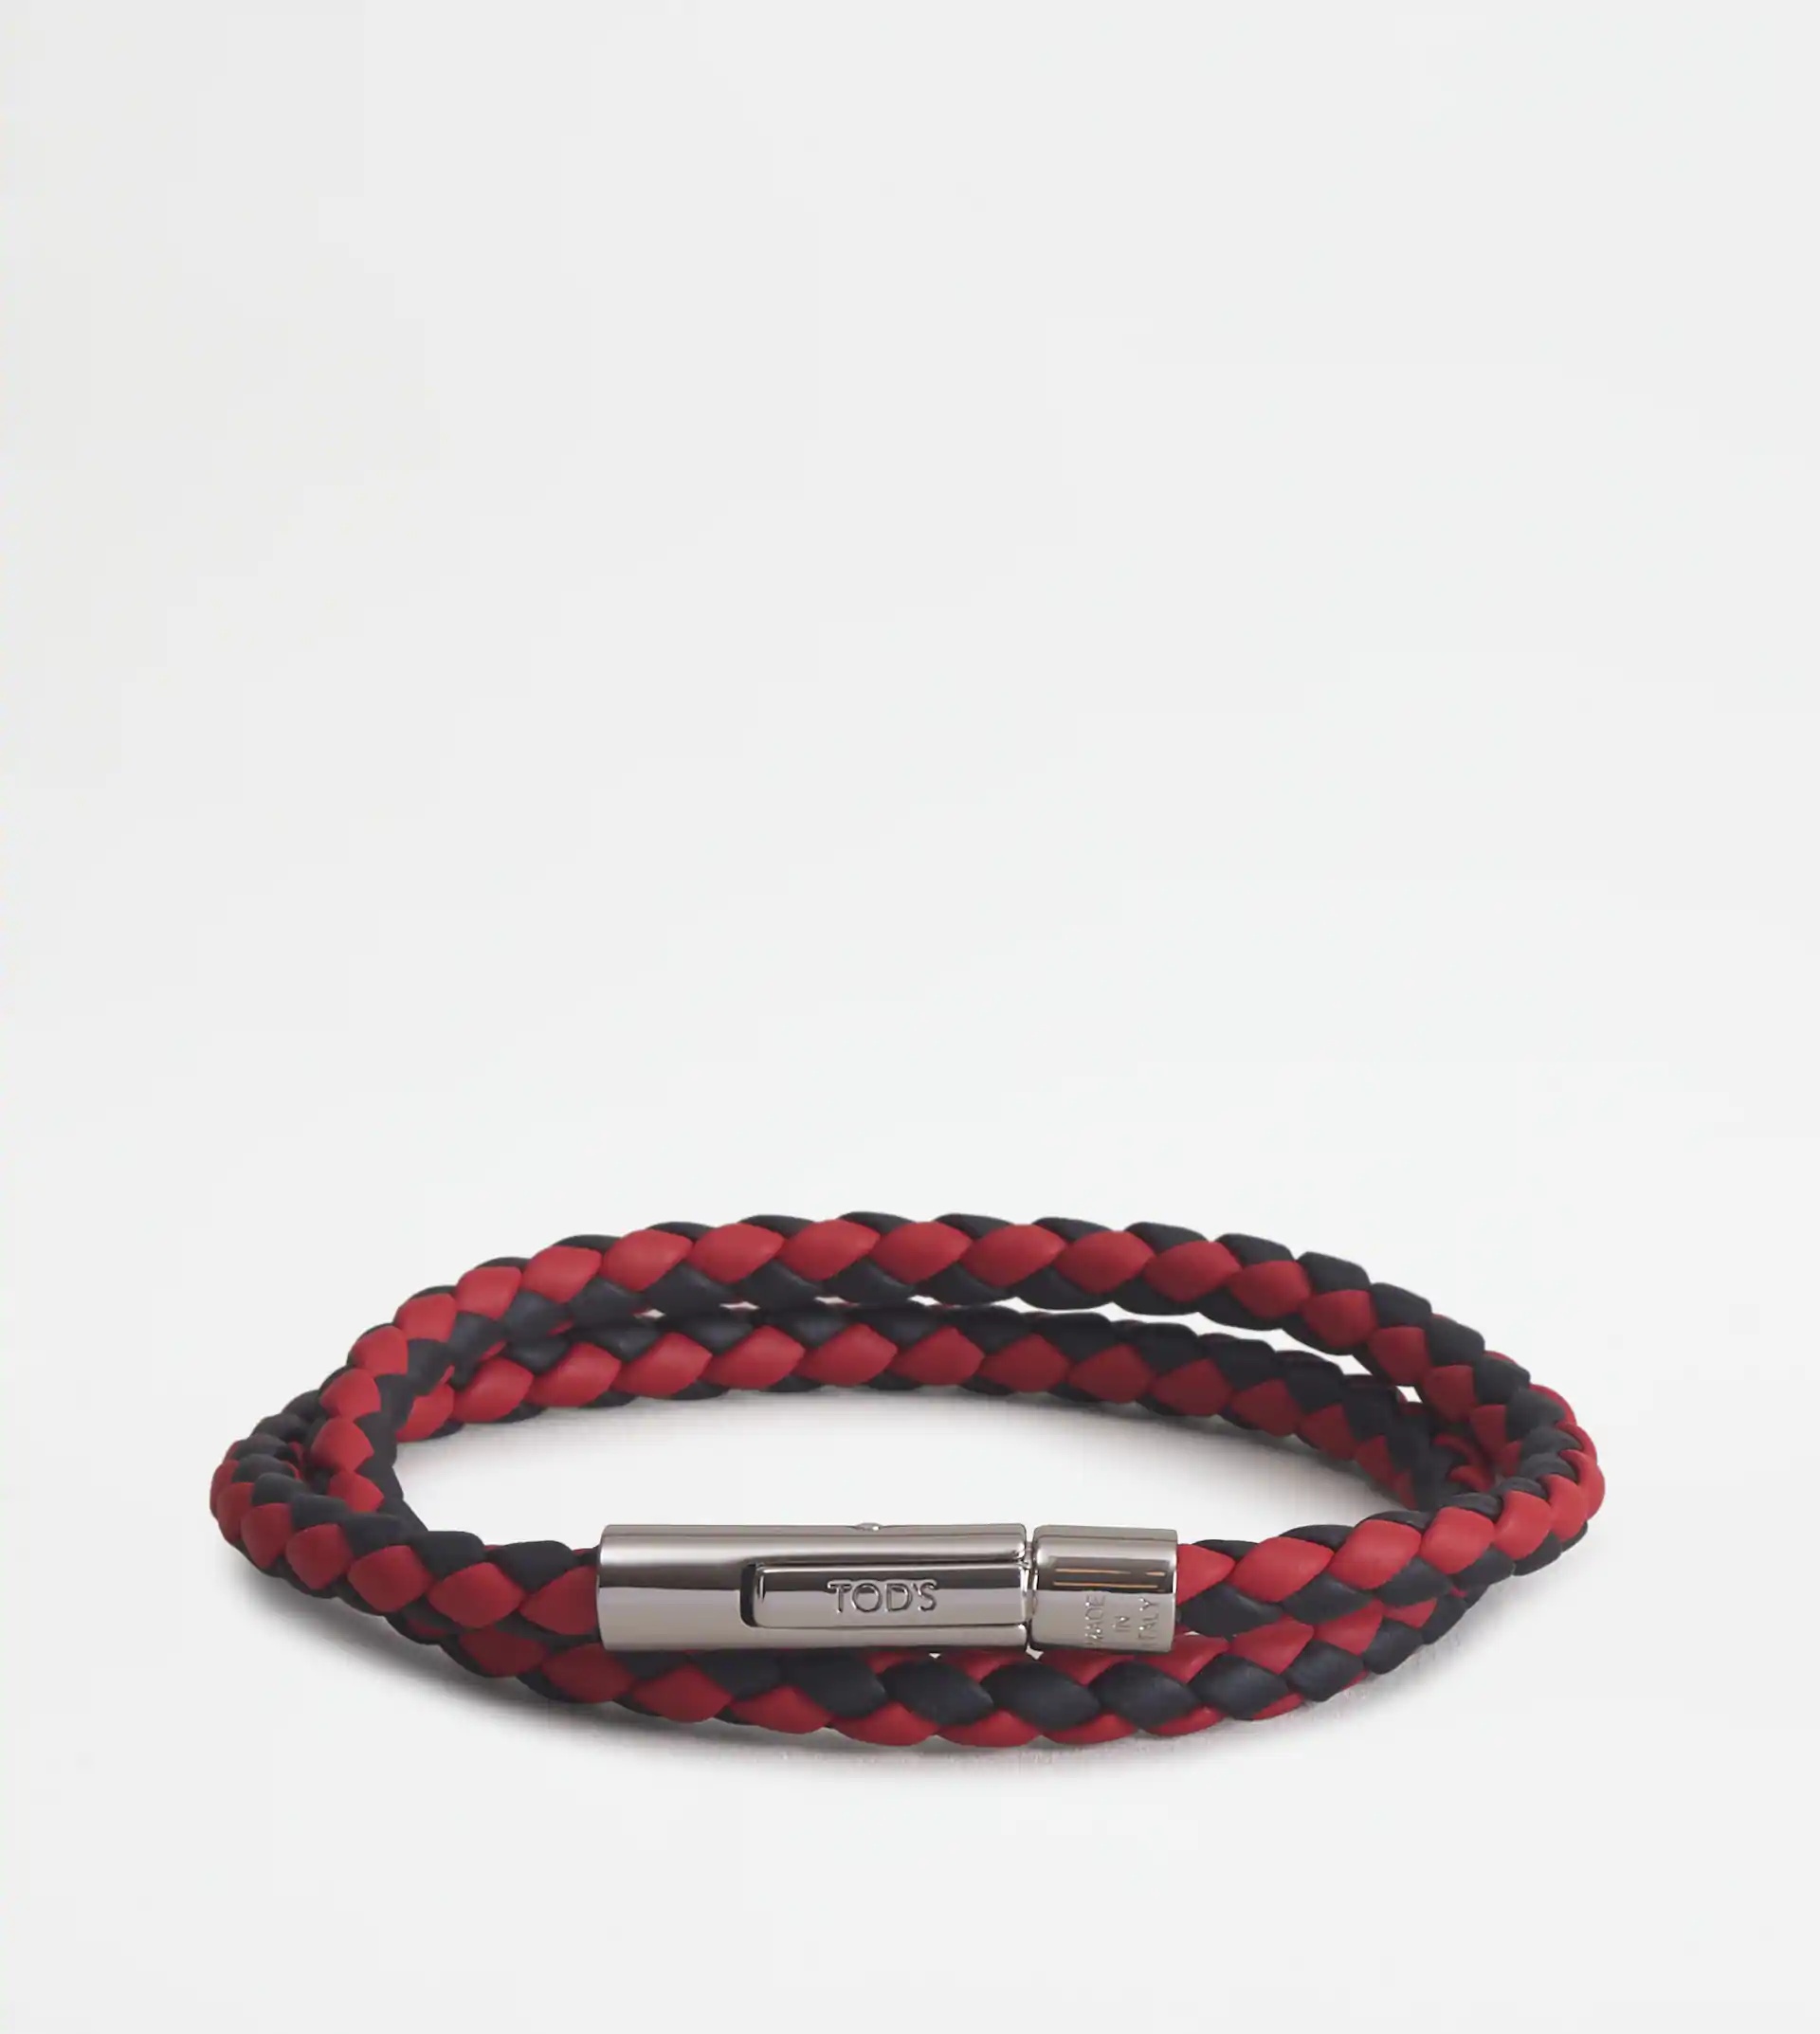 MYCOLORS BRACELET IN LEATHER - BLACK, RED - 1